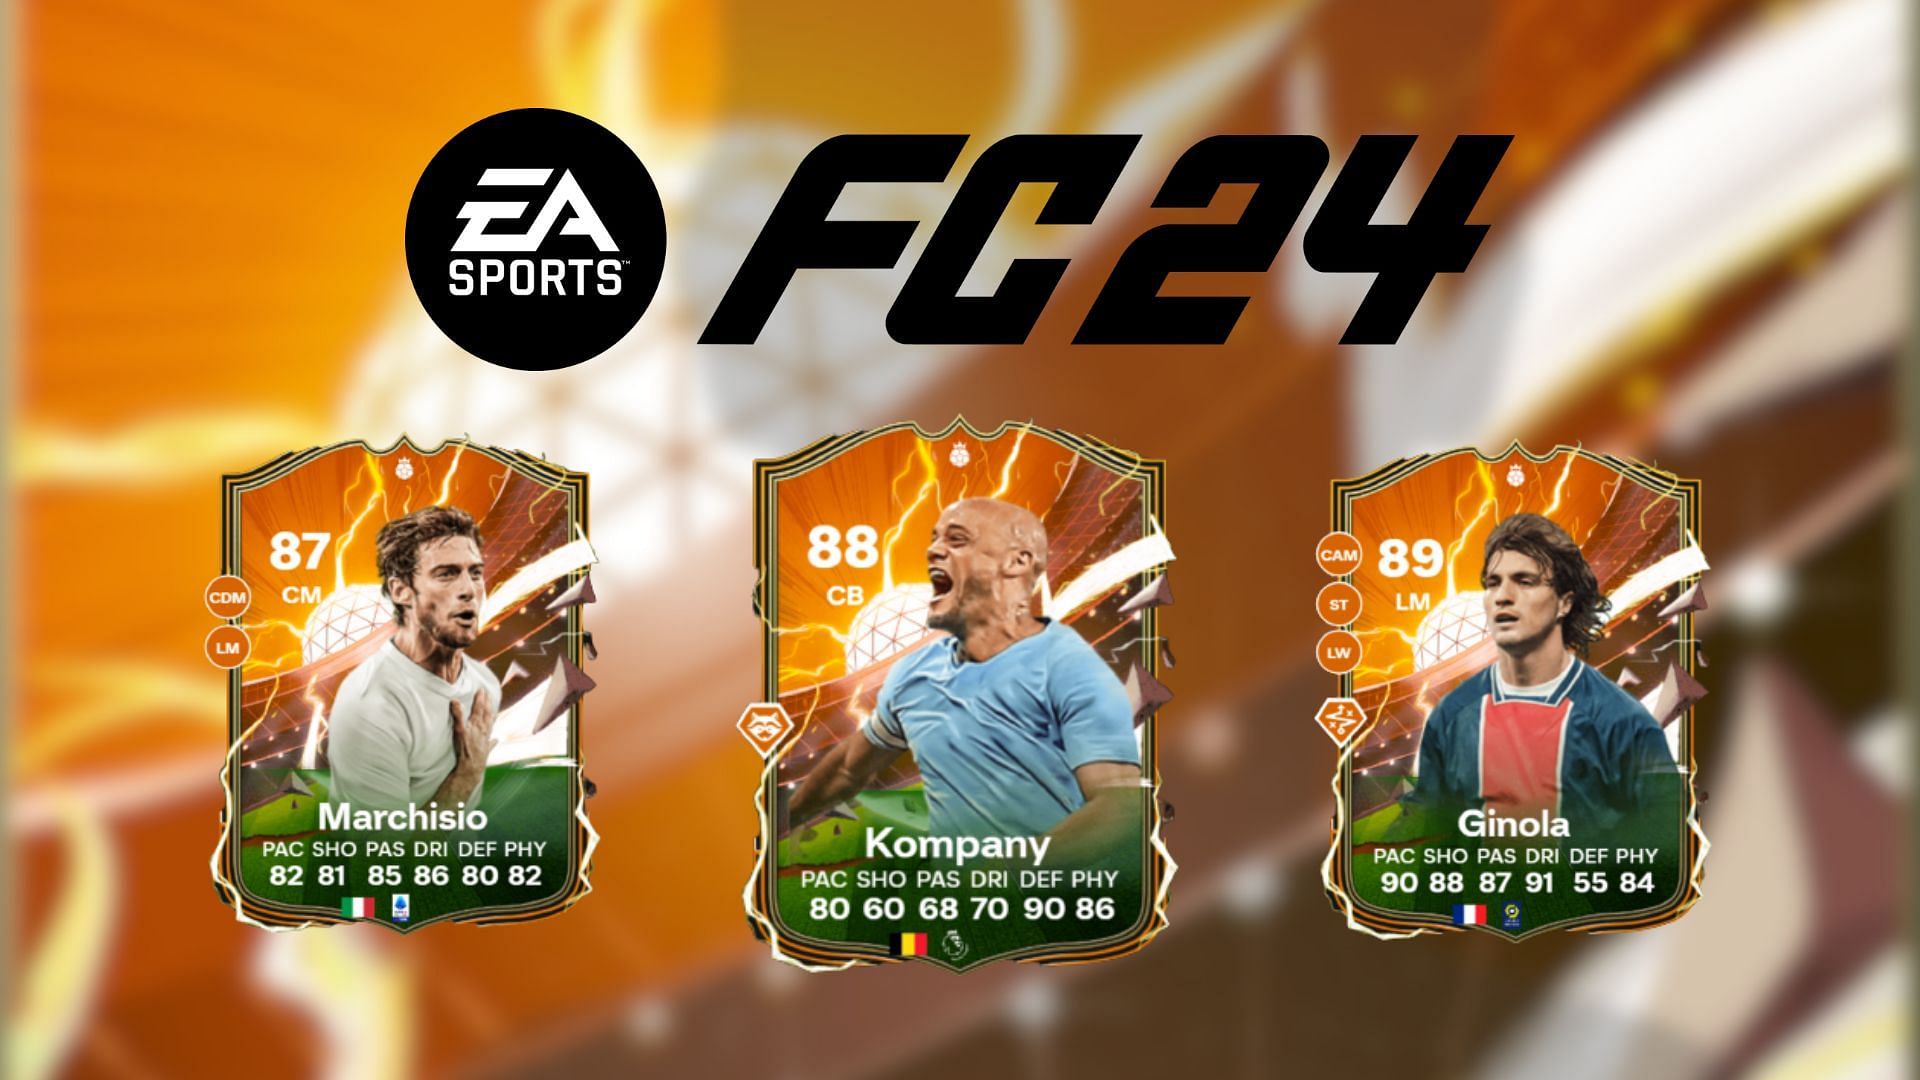 5 best EA FC 24 Base Hero player cards to use